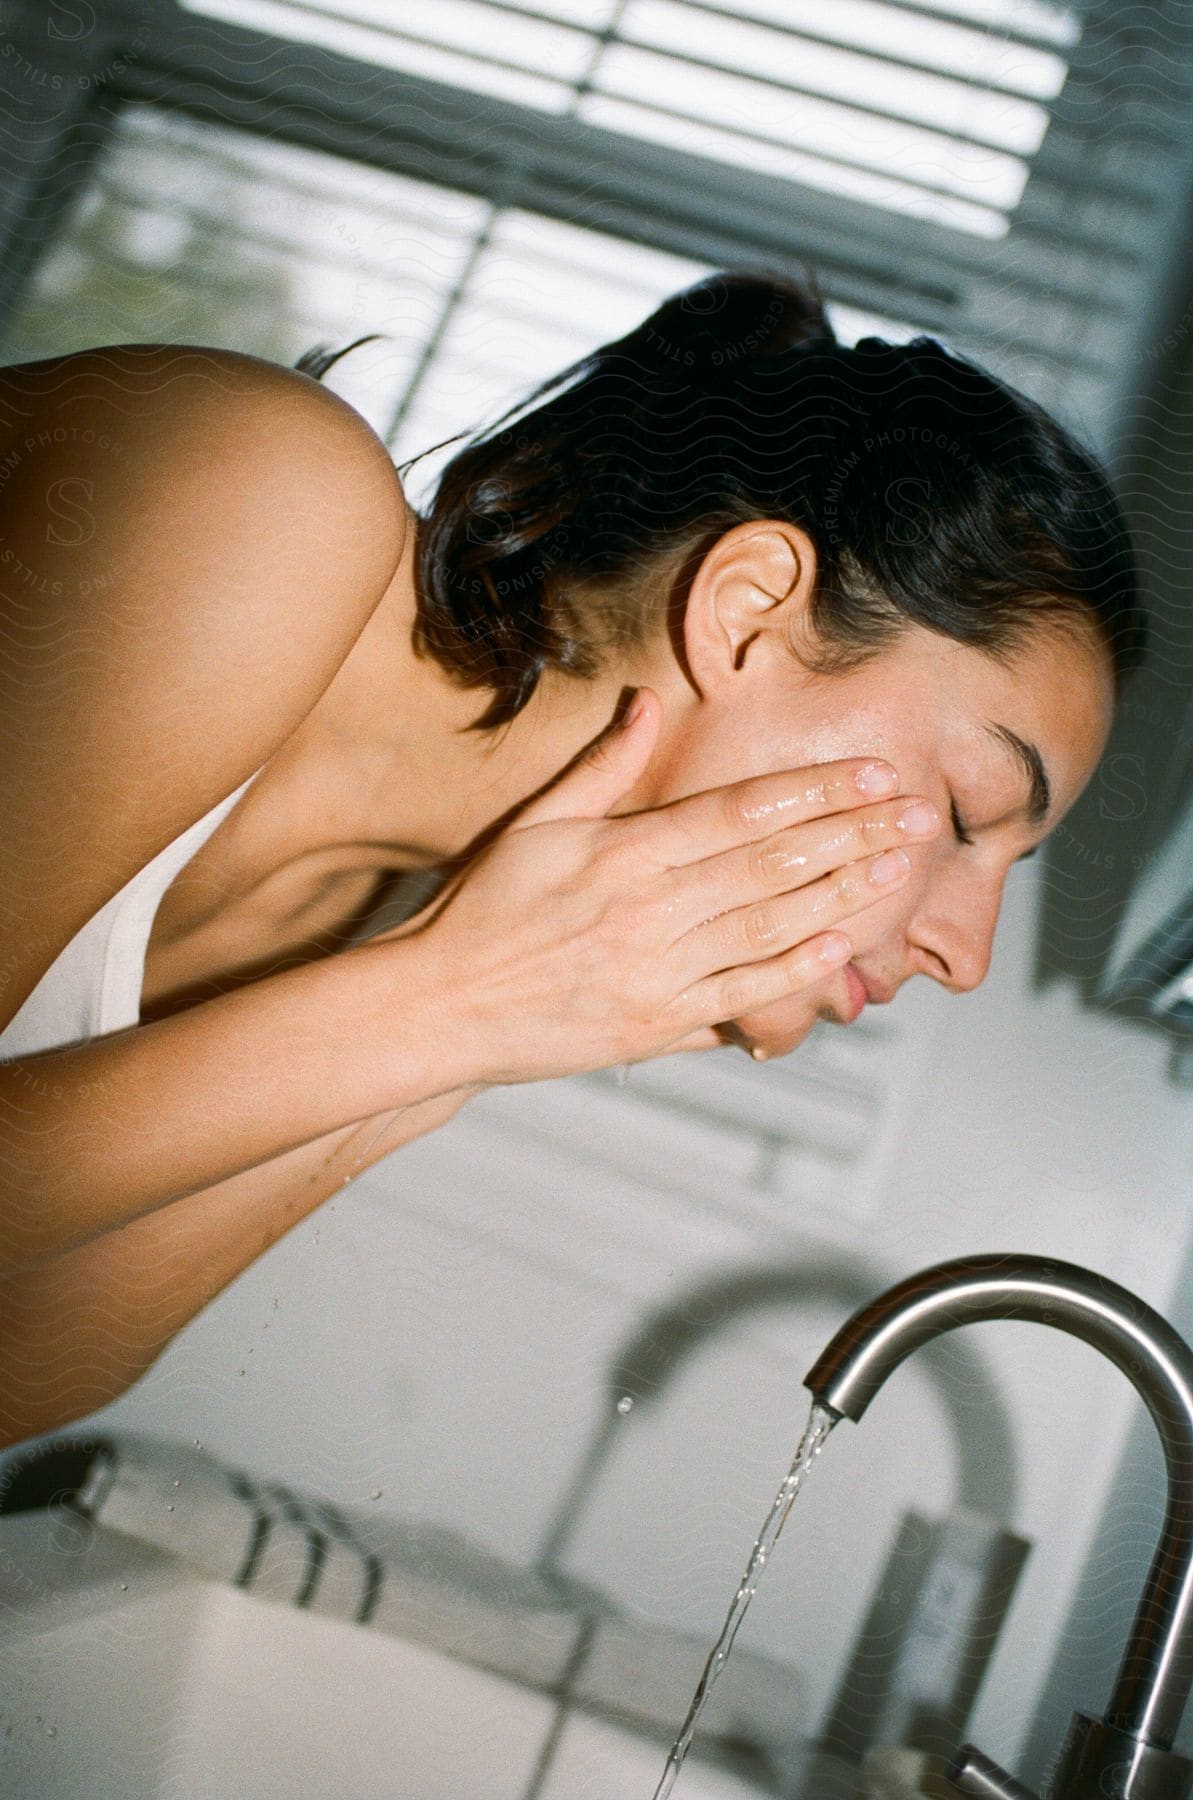 A woman washes her face over a running sink.